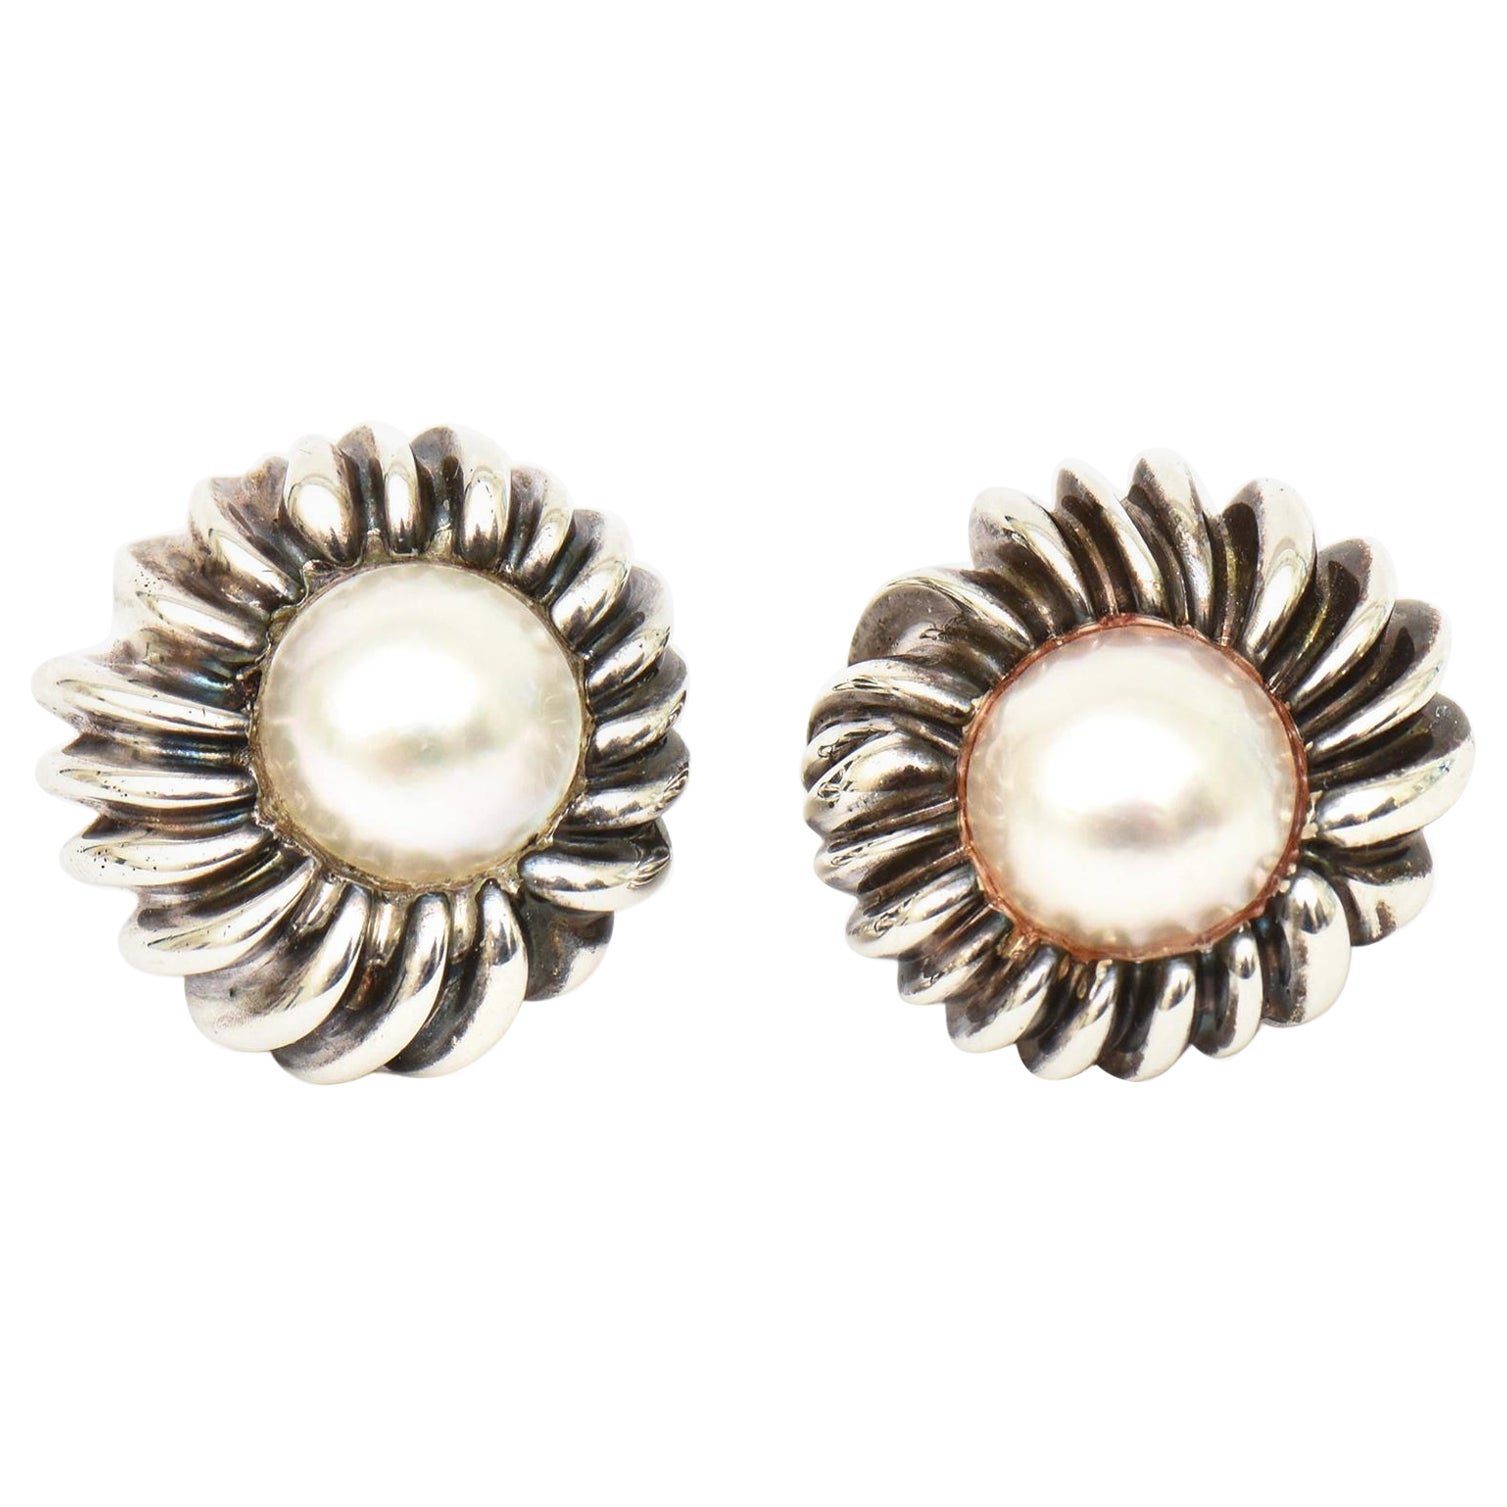 Vintage Tiffany and Co. Sterling Silver and Mabe Pearl Lever Back Earrings